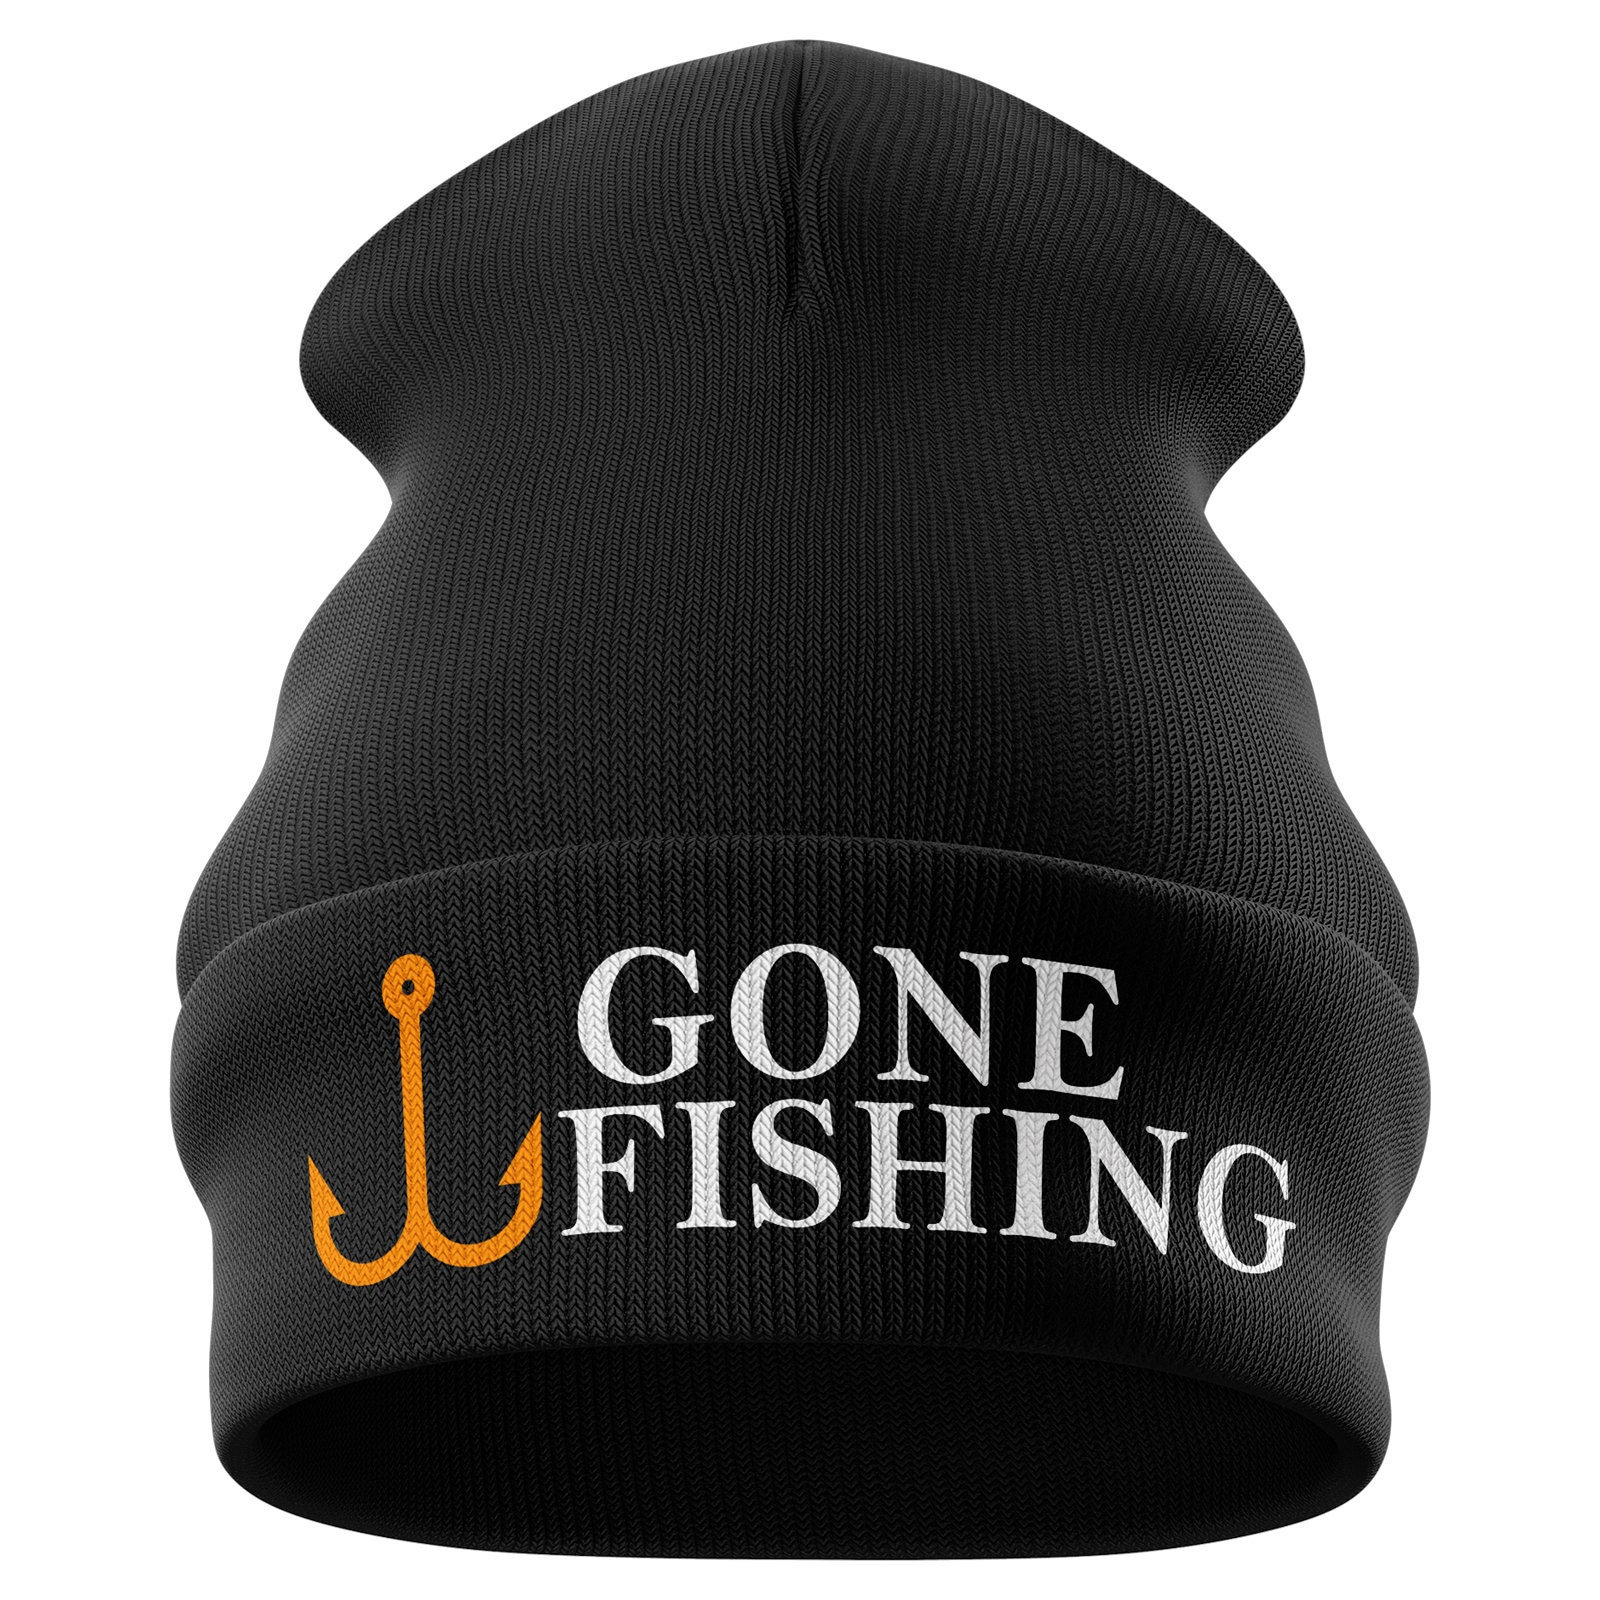 Gone Fishing Beanie Hat, EMBROIDERED Beanie, Funny Fishing Gift